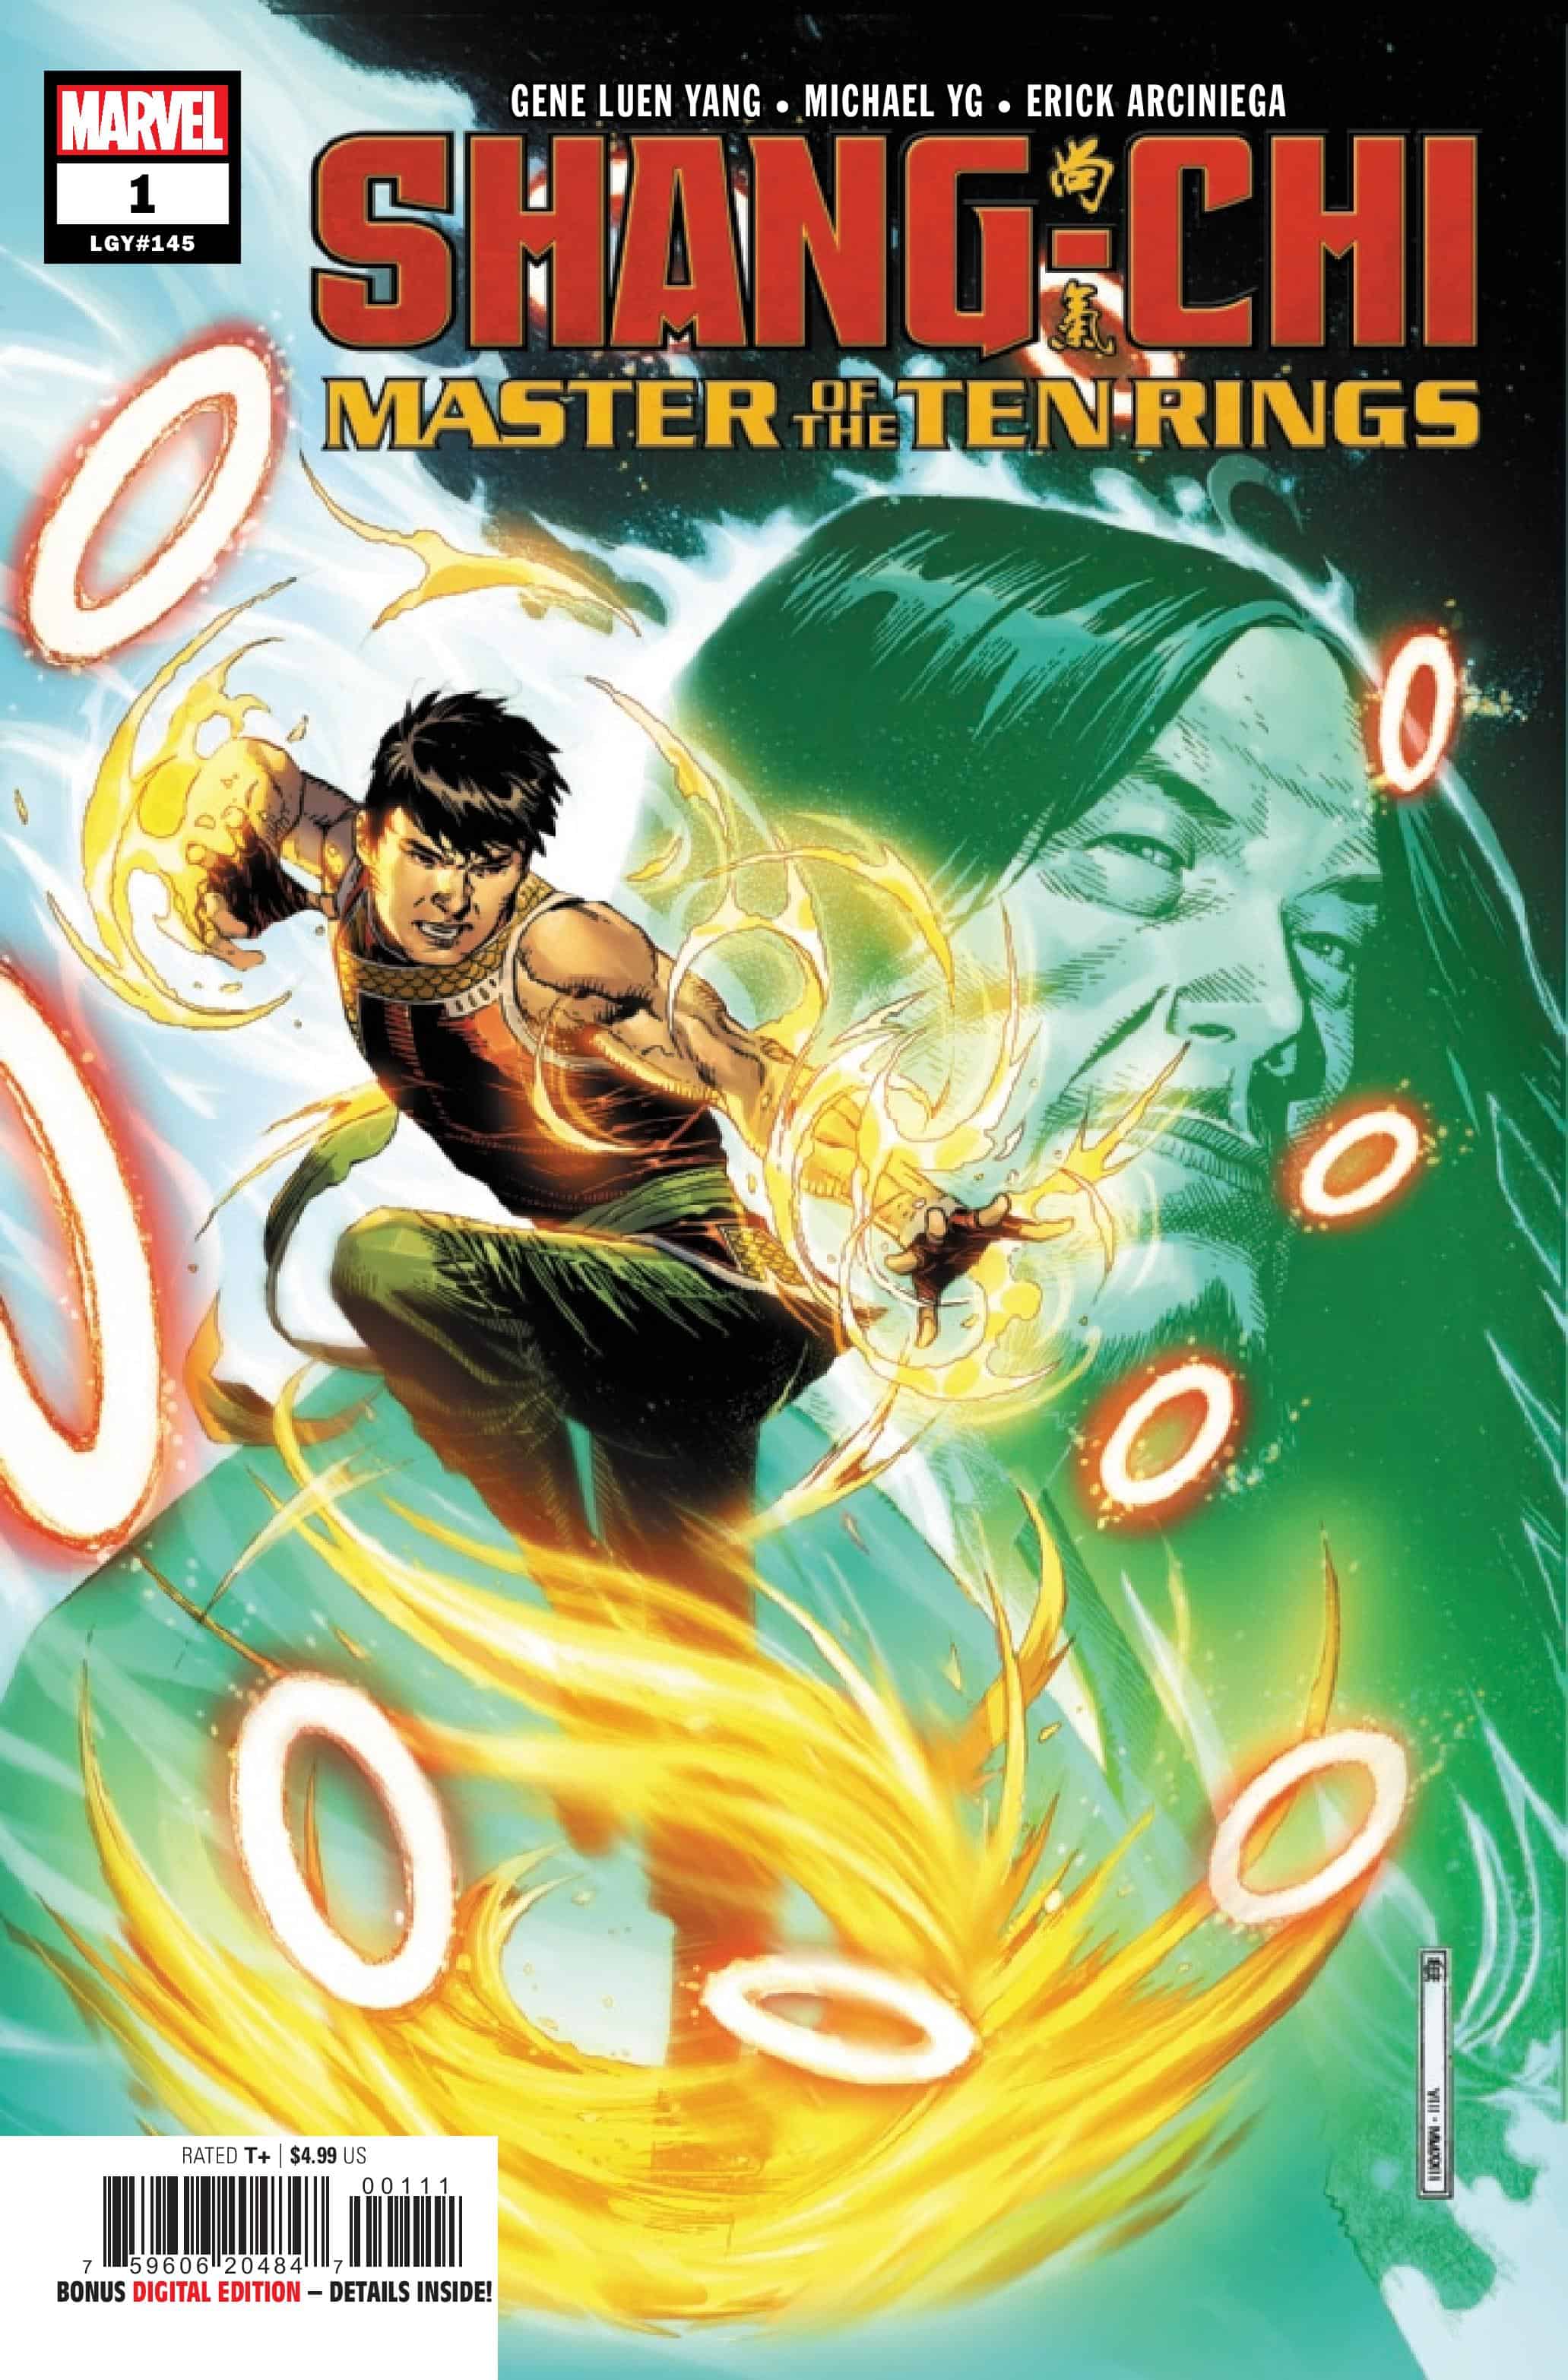 Shang-Chi #1 is fistfuls of fun - Polygon